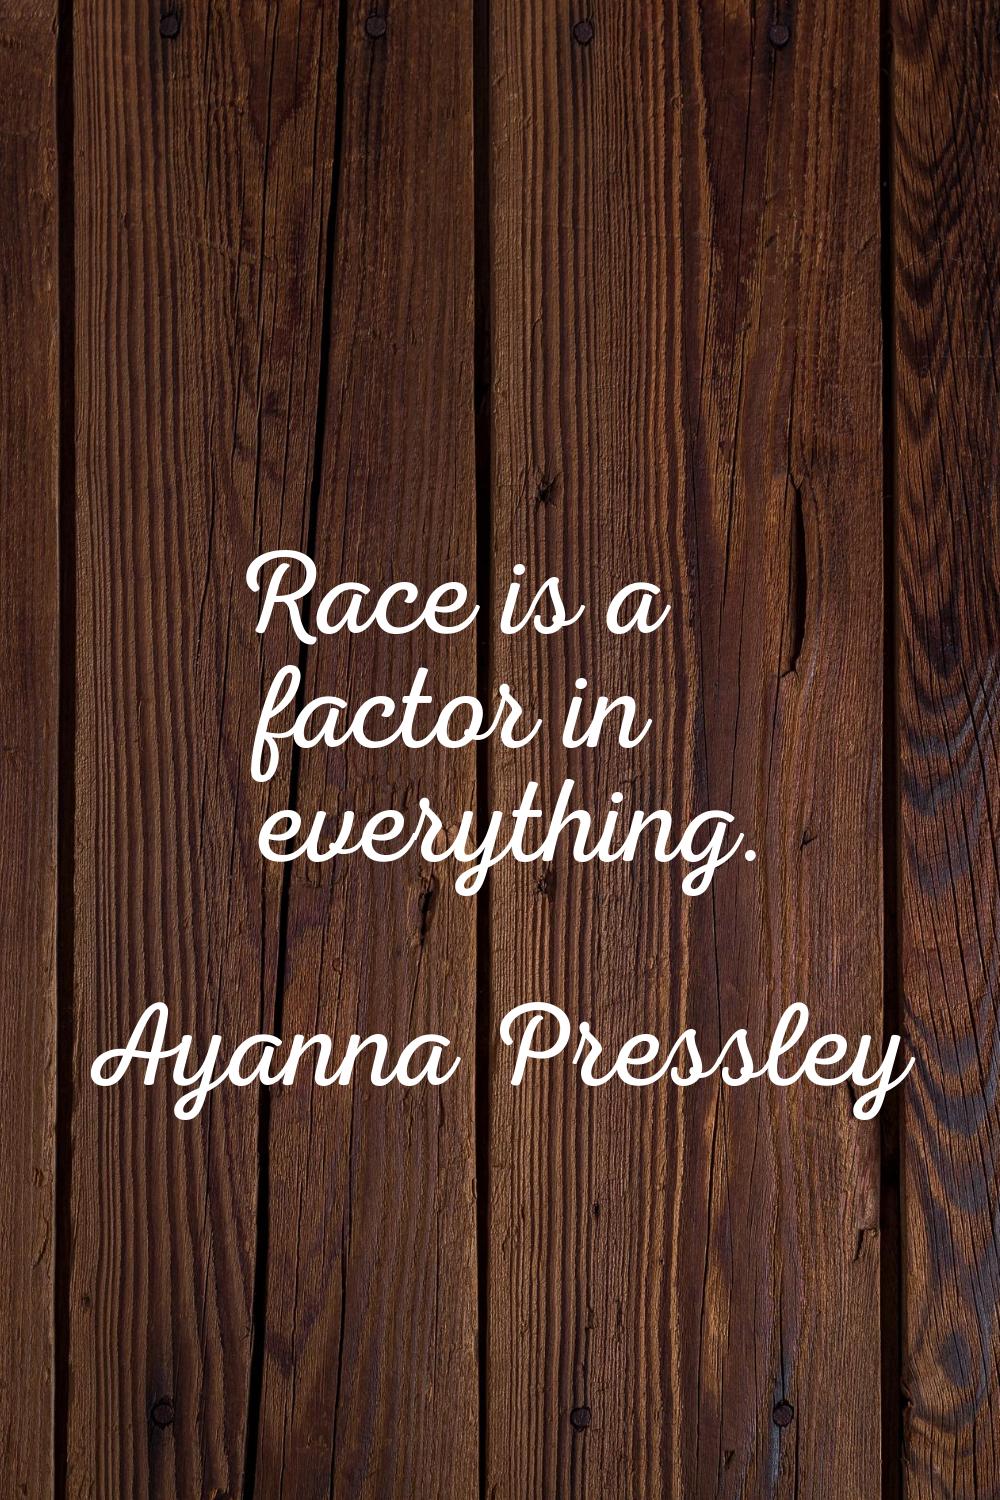 Race is a factor in everything.